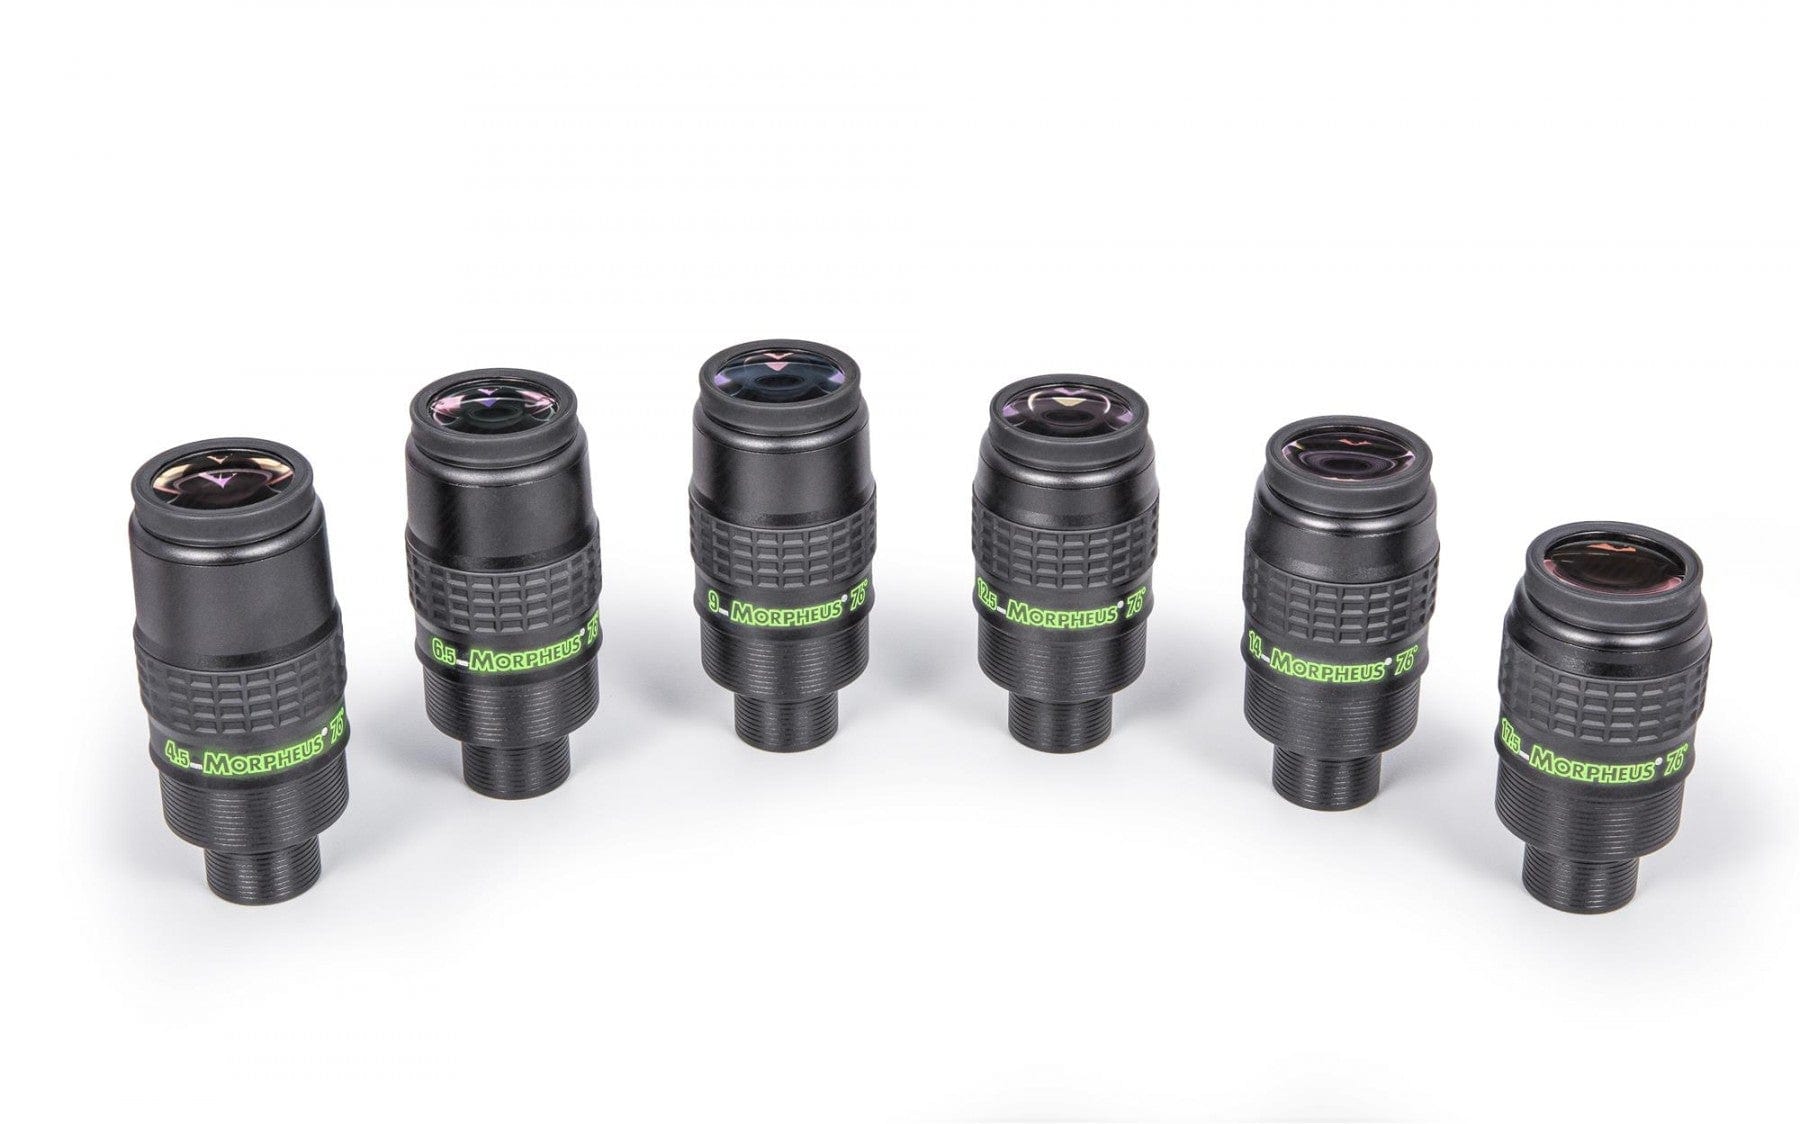 Baader Planetarium Eyepiece Baader Complete Morpheus 6 Piece Eyepiece Set - Includes Fitted Hardcase - 2954200